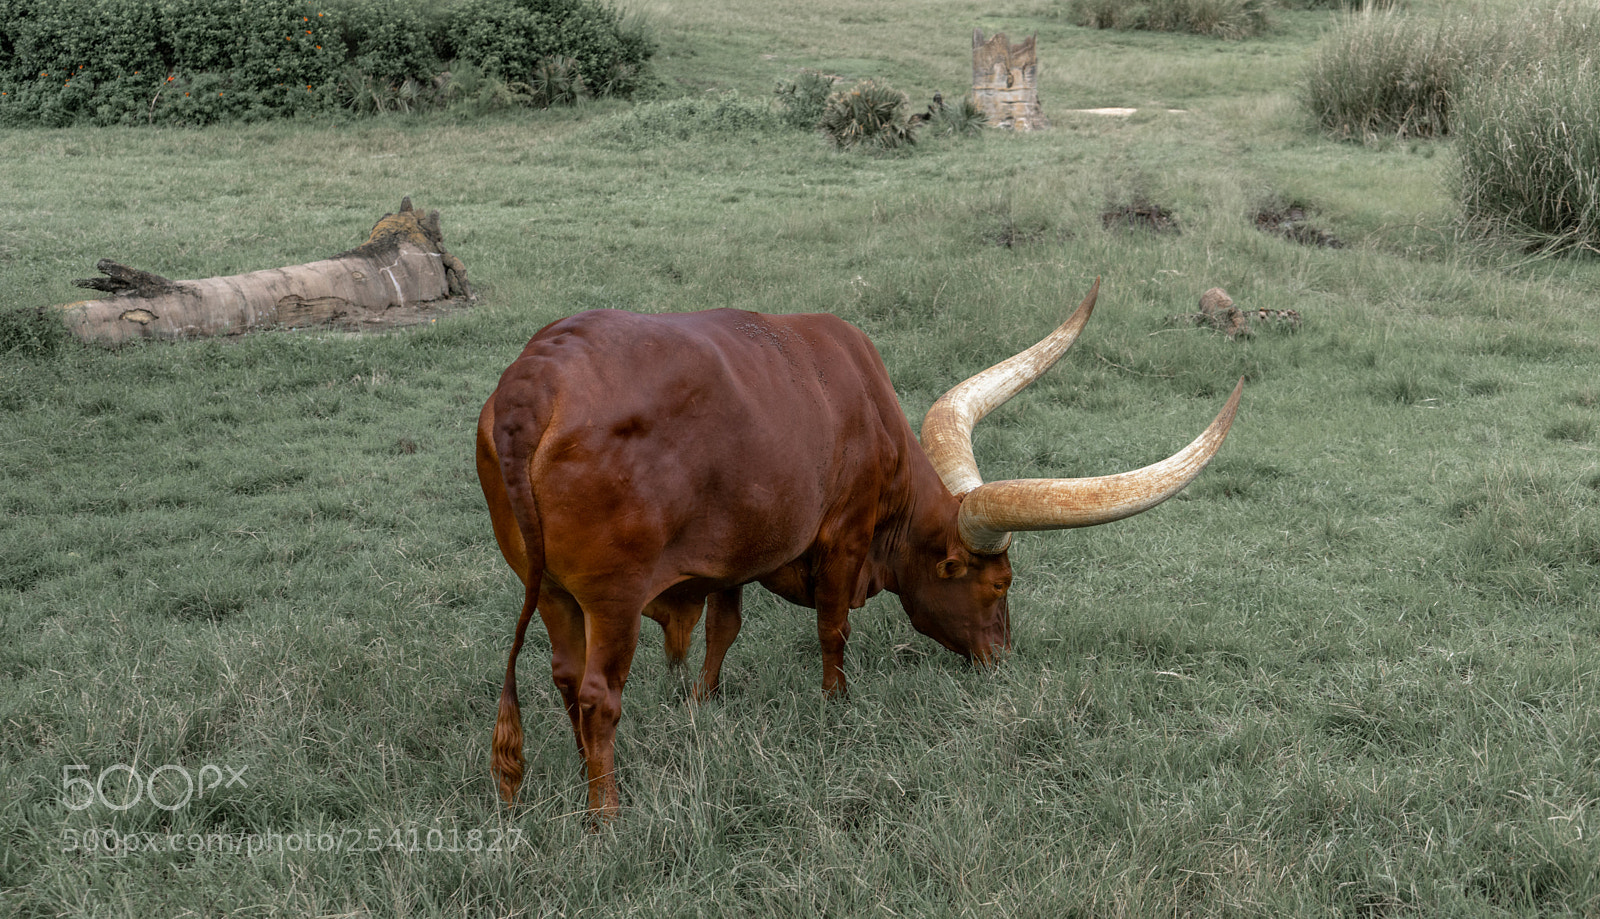 Sony a7 sample photo. Ox with big horns photography